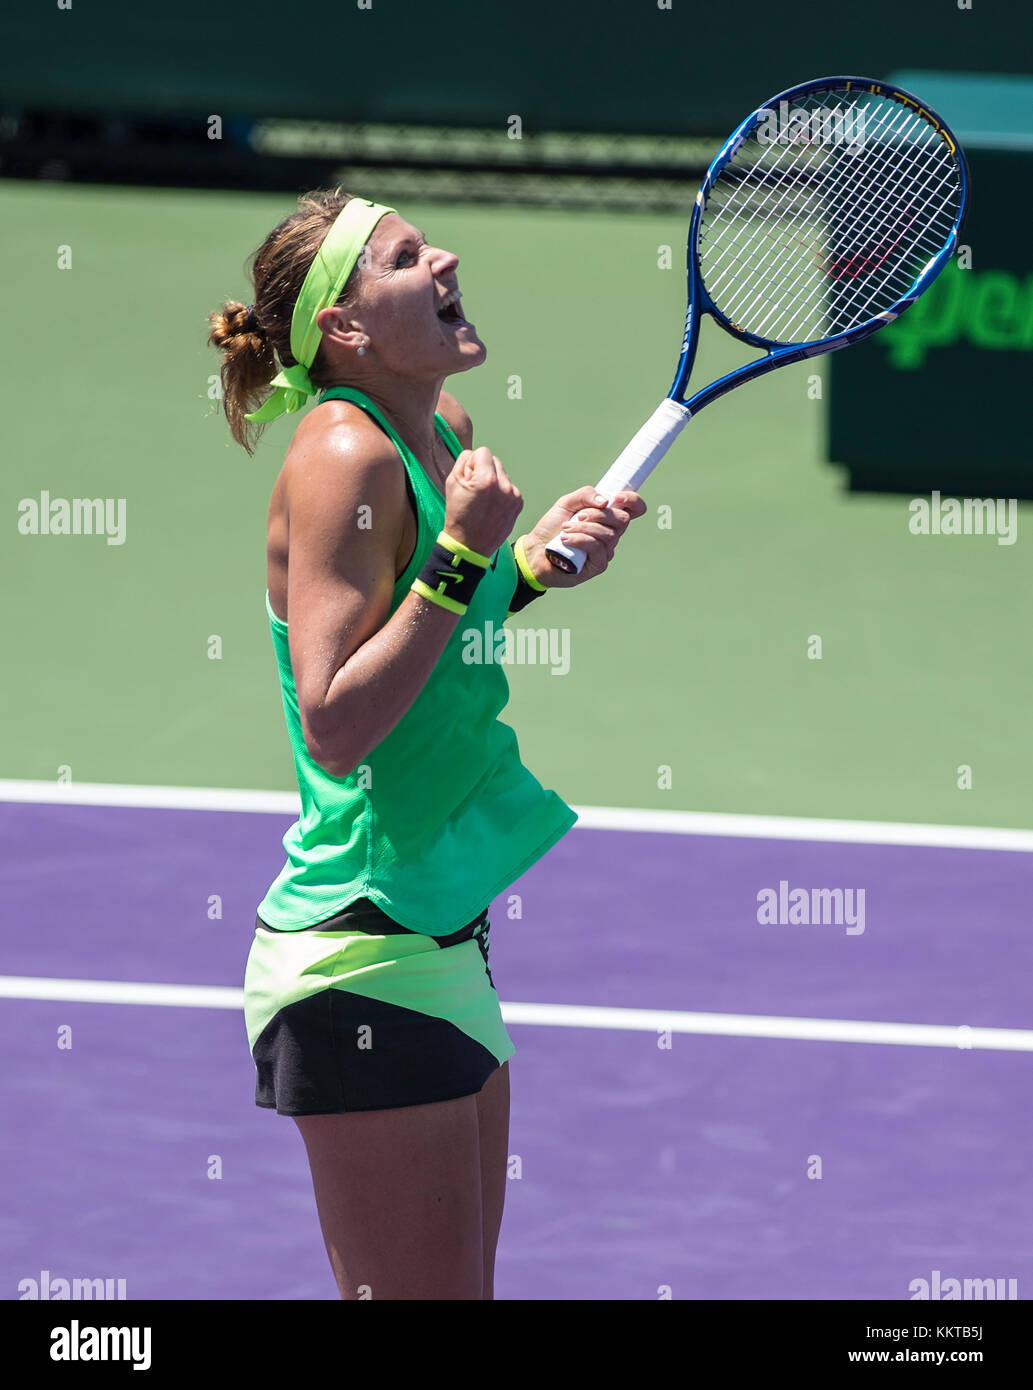 KEY BISCAYNE, FL - MARCH 27: Lucie Safarova on day 8 of the Miami Open at Crandon Park Tennis Center on March 27, 2017 in Key Biscayne, Florida.   People:  Lucie Safarova  Transmission Ref:  MNC20 Stock Photo